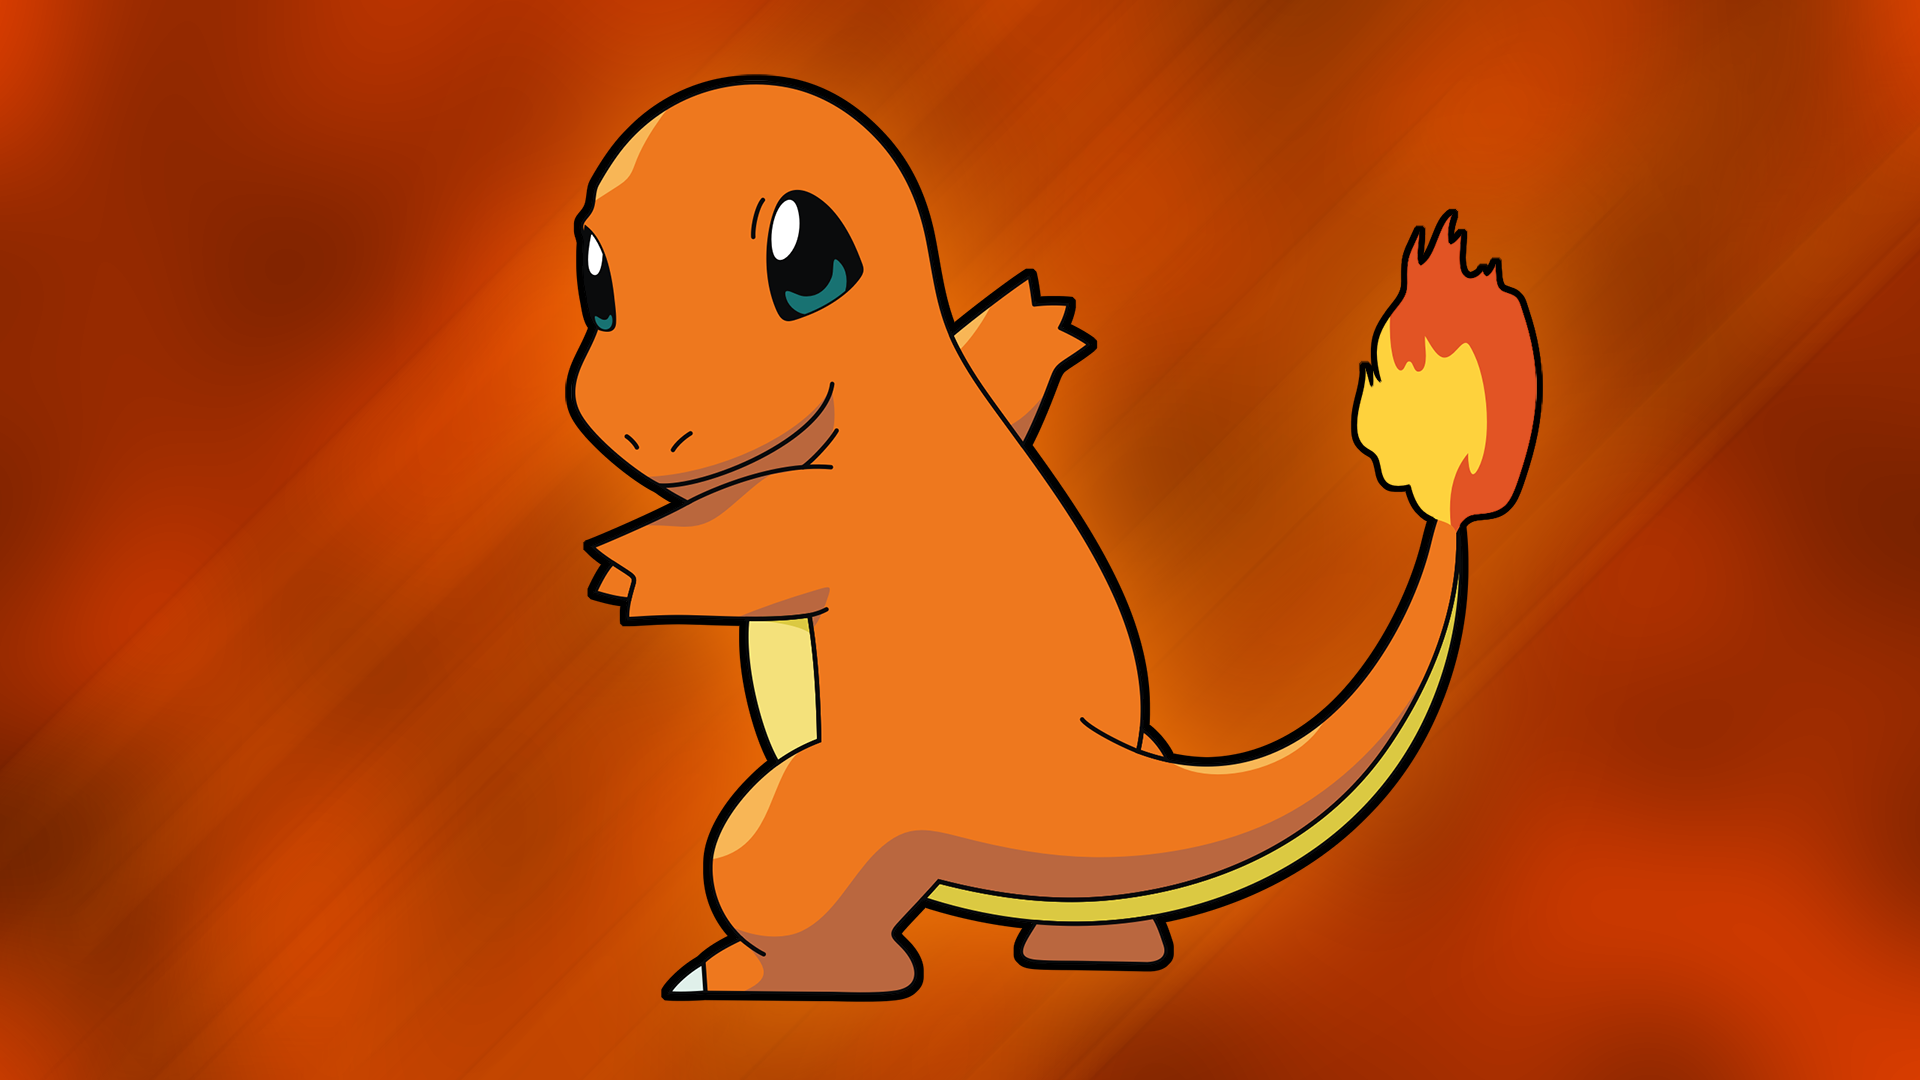 Cool Pokemon Wallpapers Charmander Related Keywords & Sugges